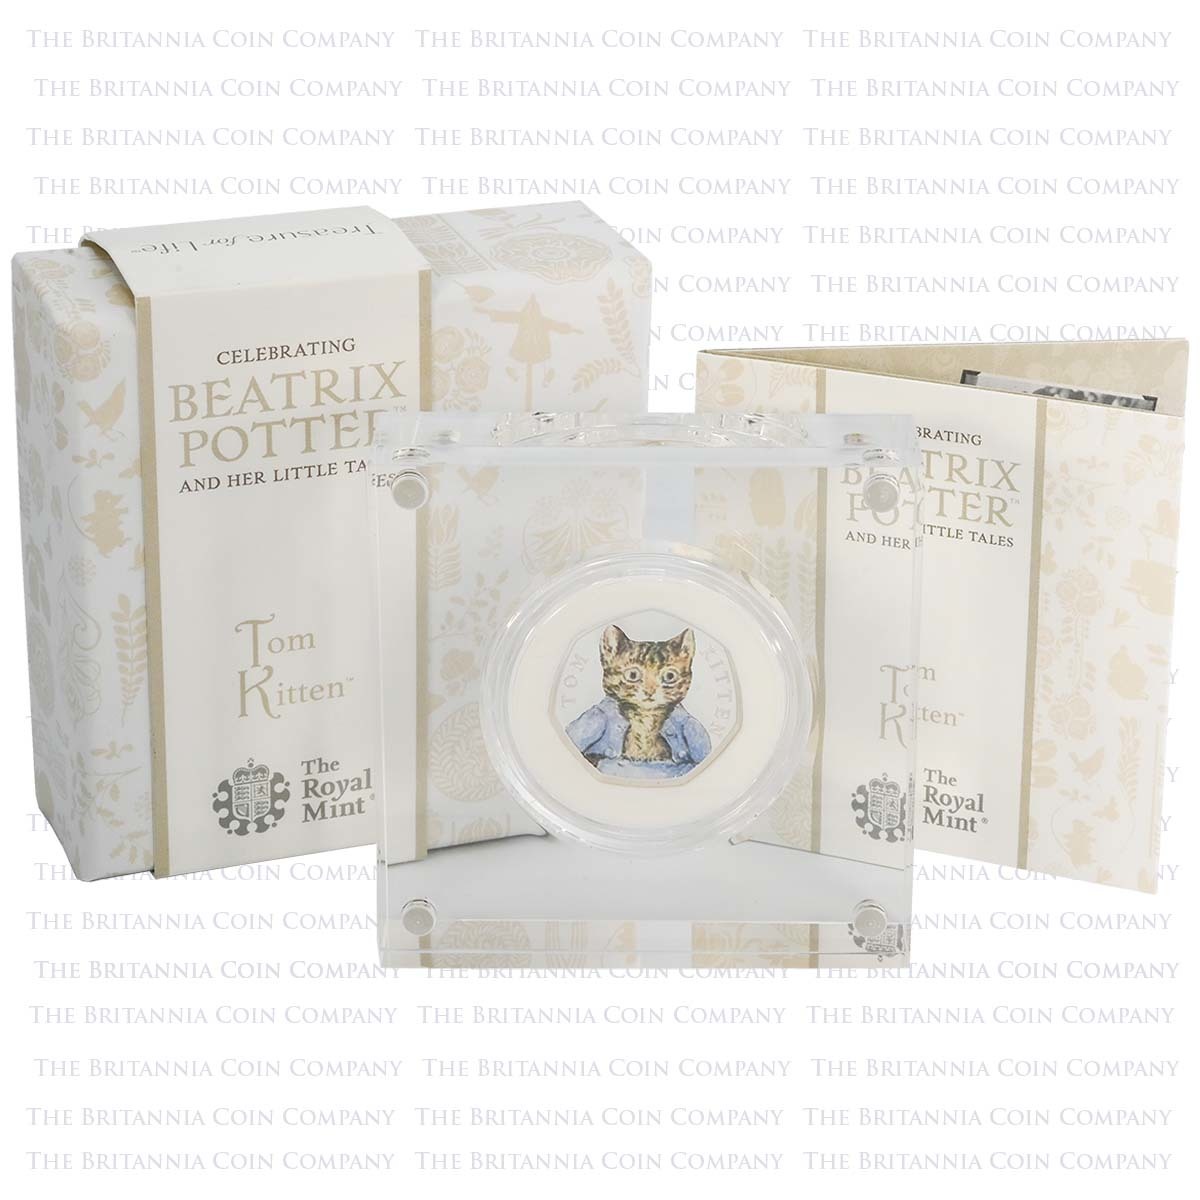 UK17TKSP 2017 Beatrix Potter Tom Kitten Fifty Pence Colour Printed Silver Proof Coin Boxed